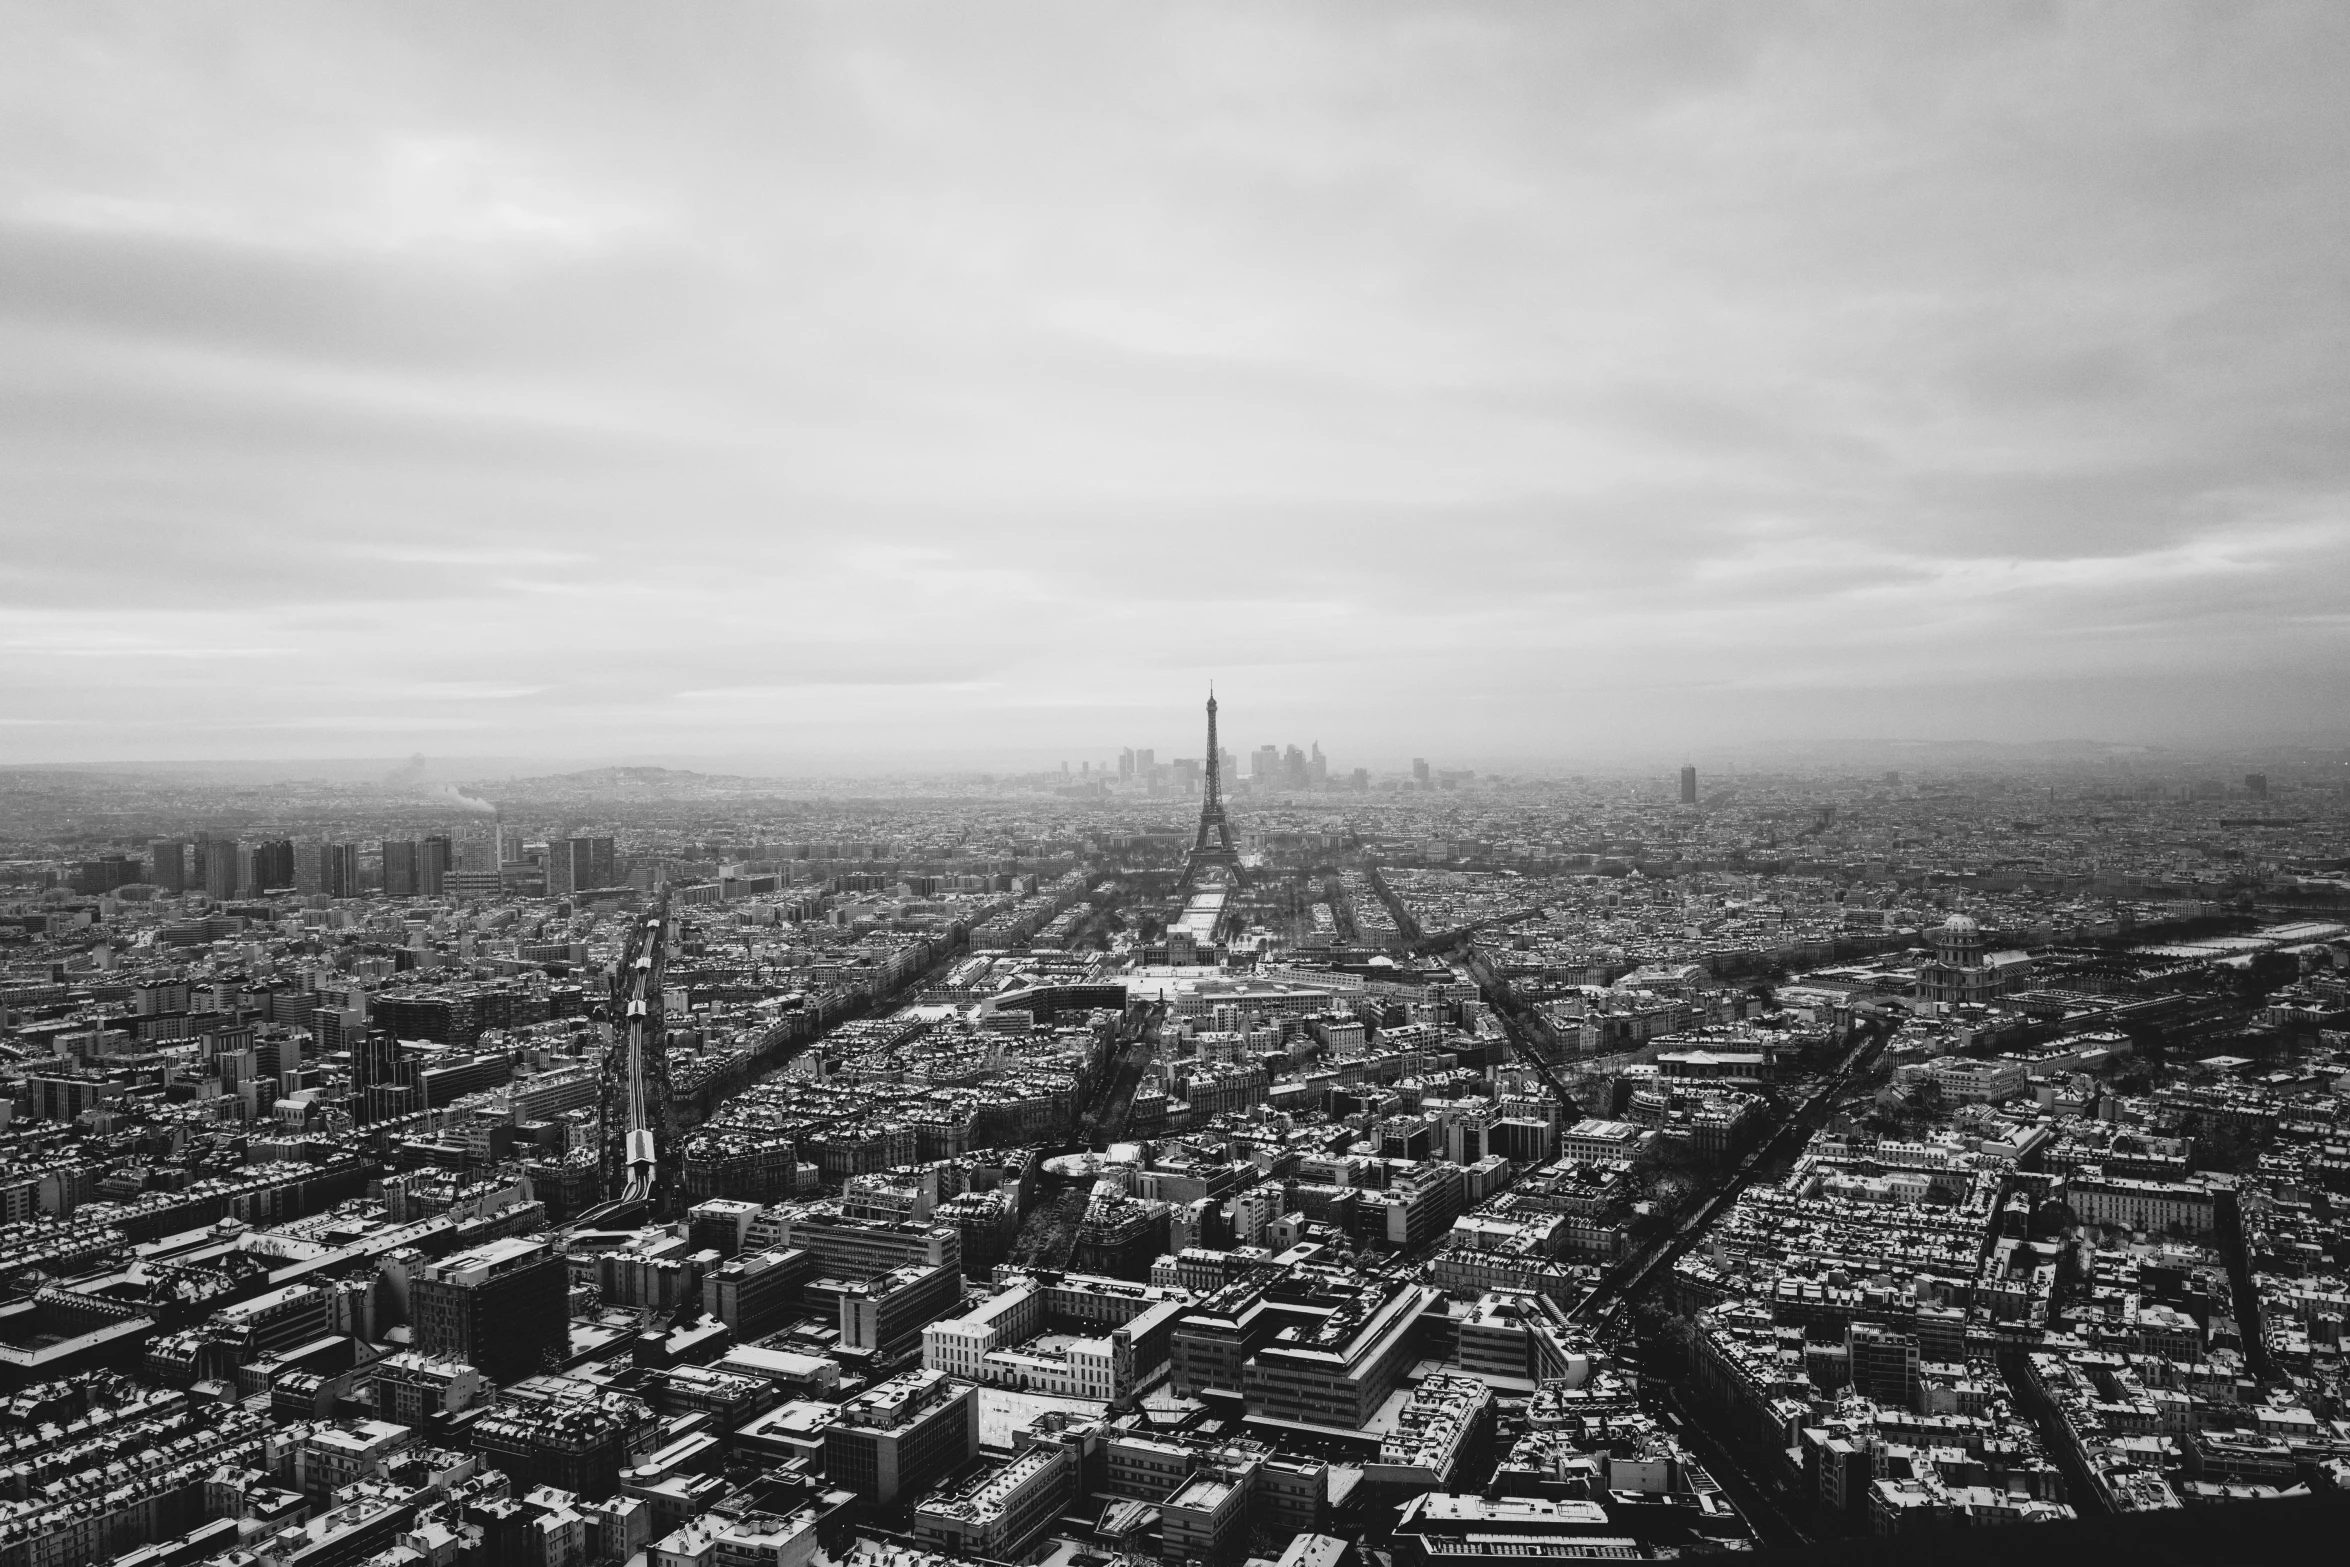 the black and white image shows a view of a city